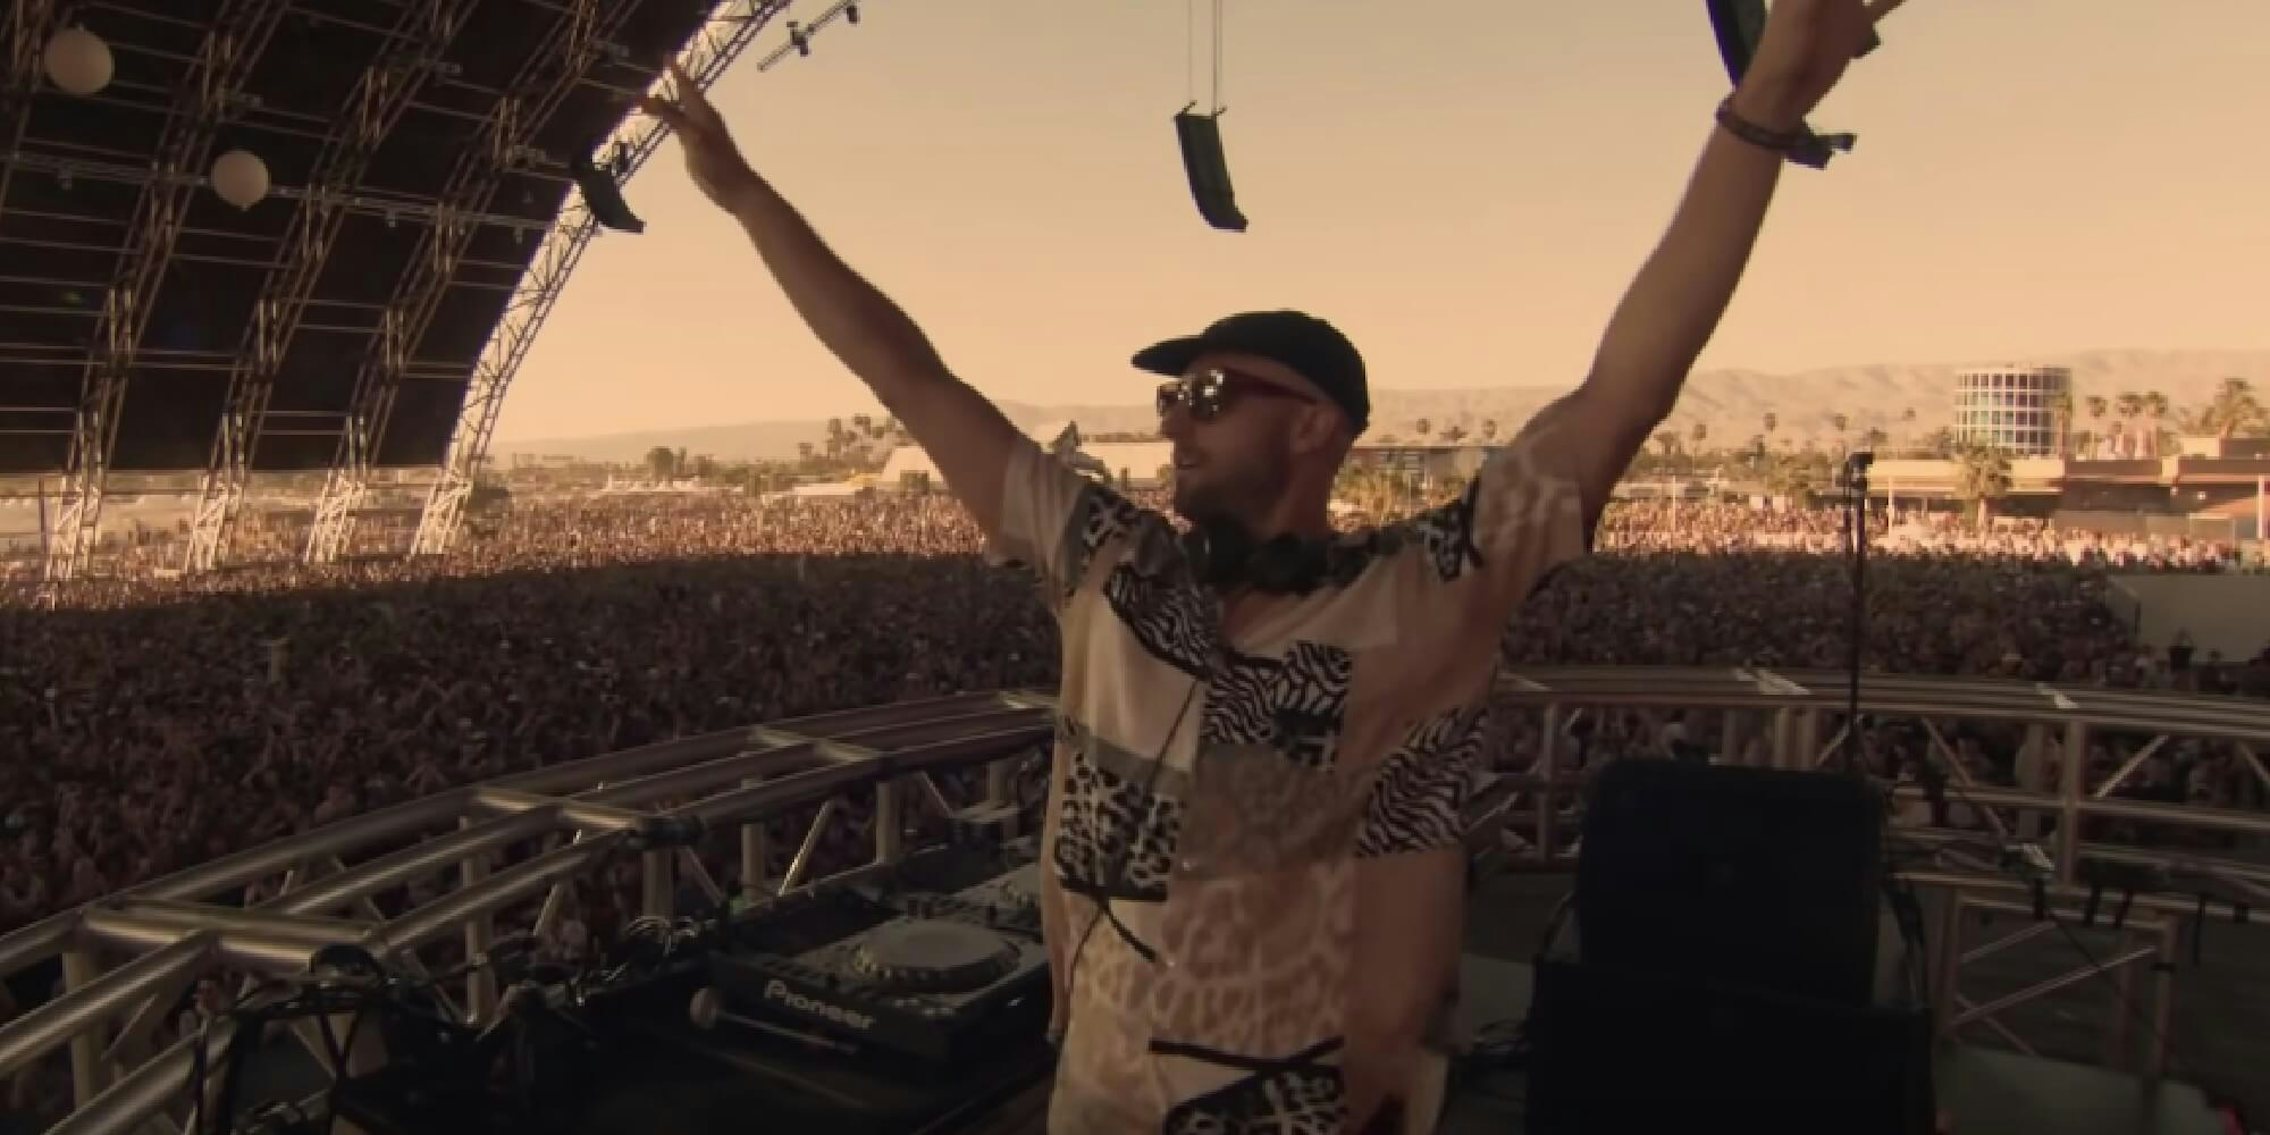 FISHER at Coachella in 2019